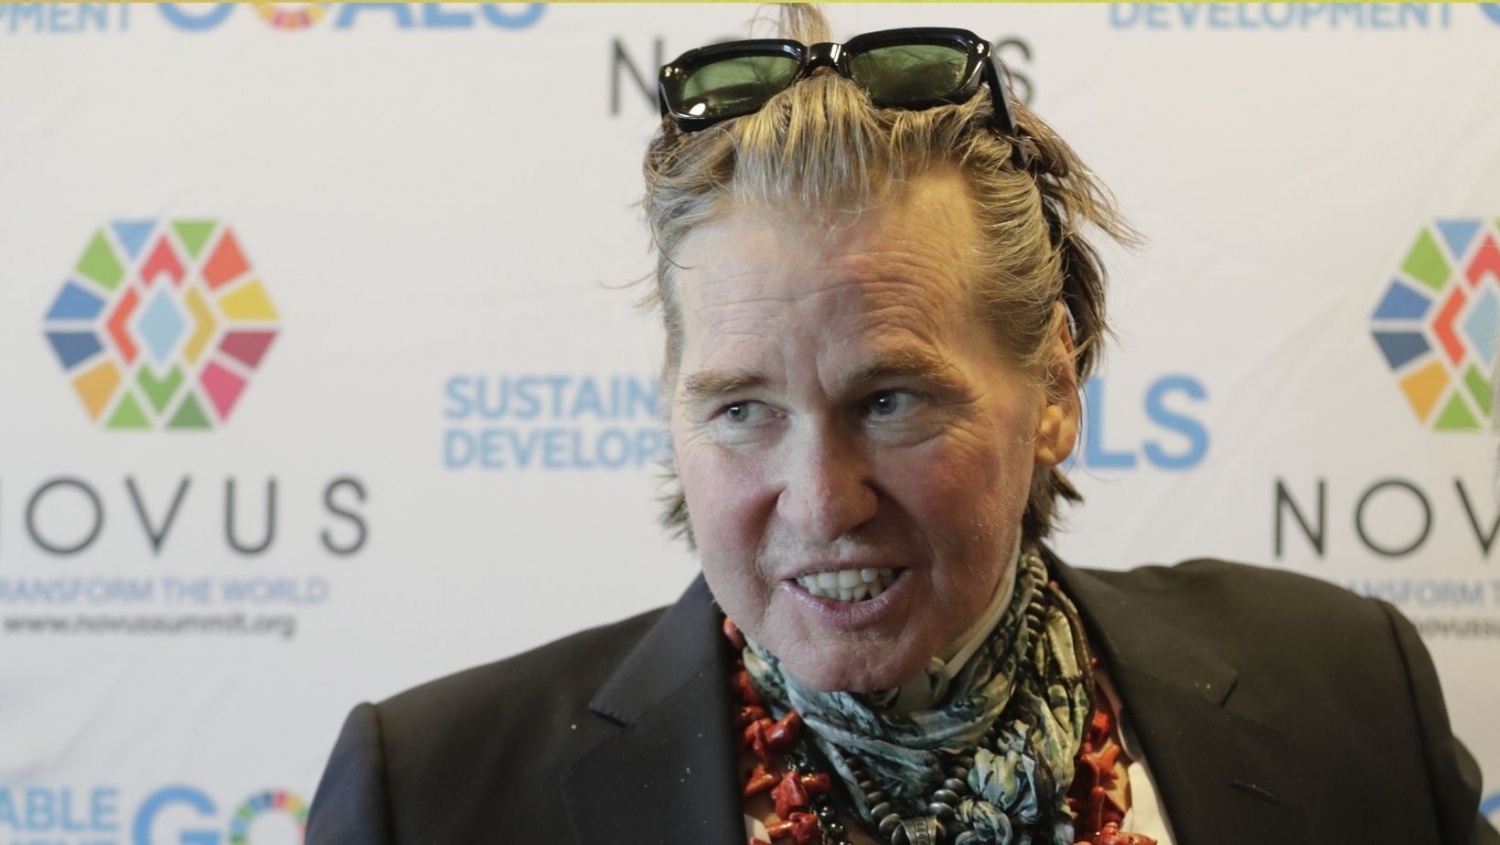 Actor Val Kilmer visits the United Nations headquarters in New York City, New York to promote the 17 Sustainable Development Goals (SDGs) initiative, July 20, 2019. (Photo by EuropaNewswire/Gado/Getty Images)